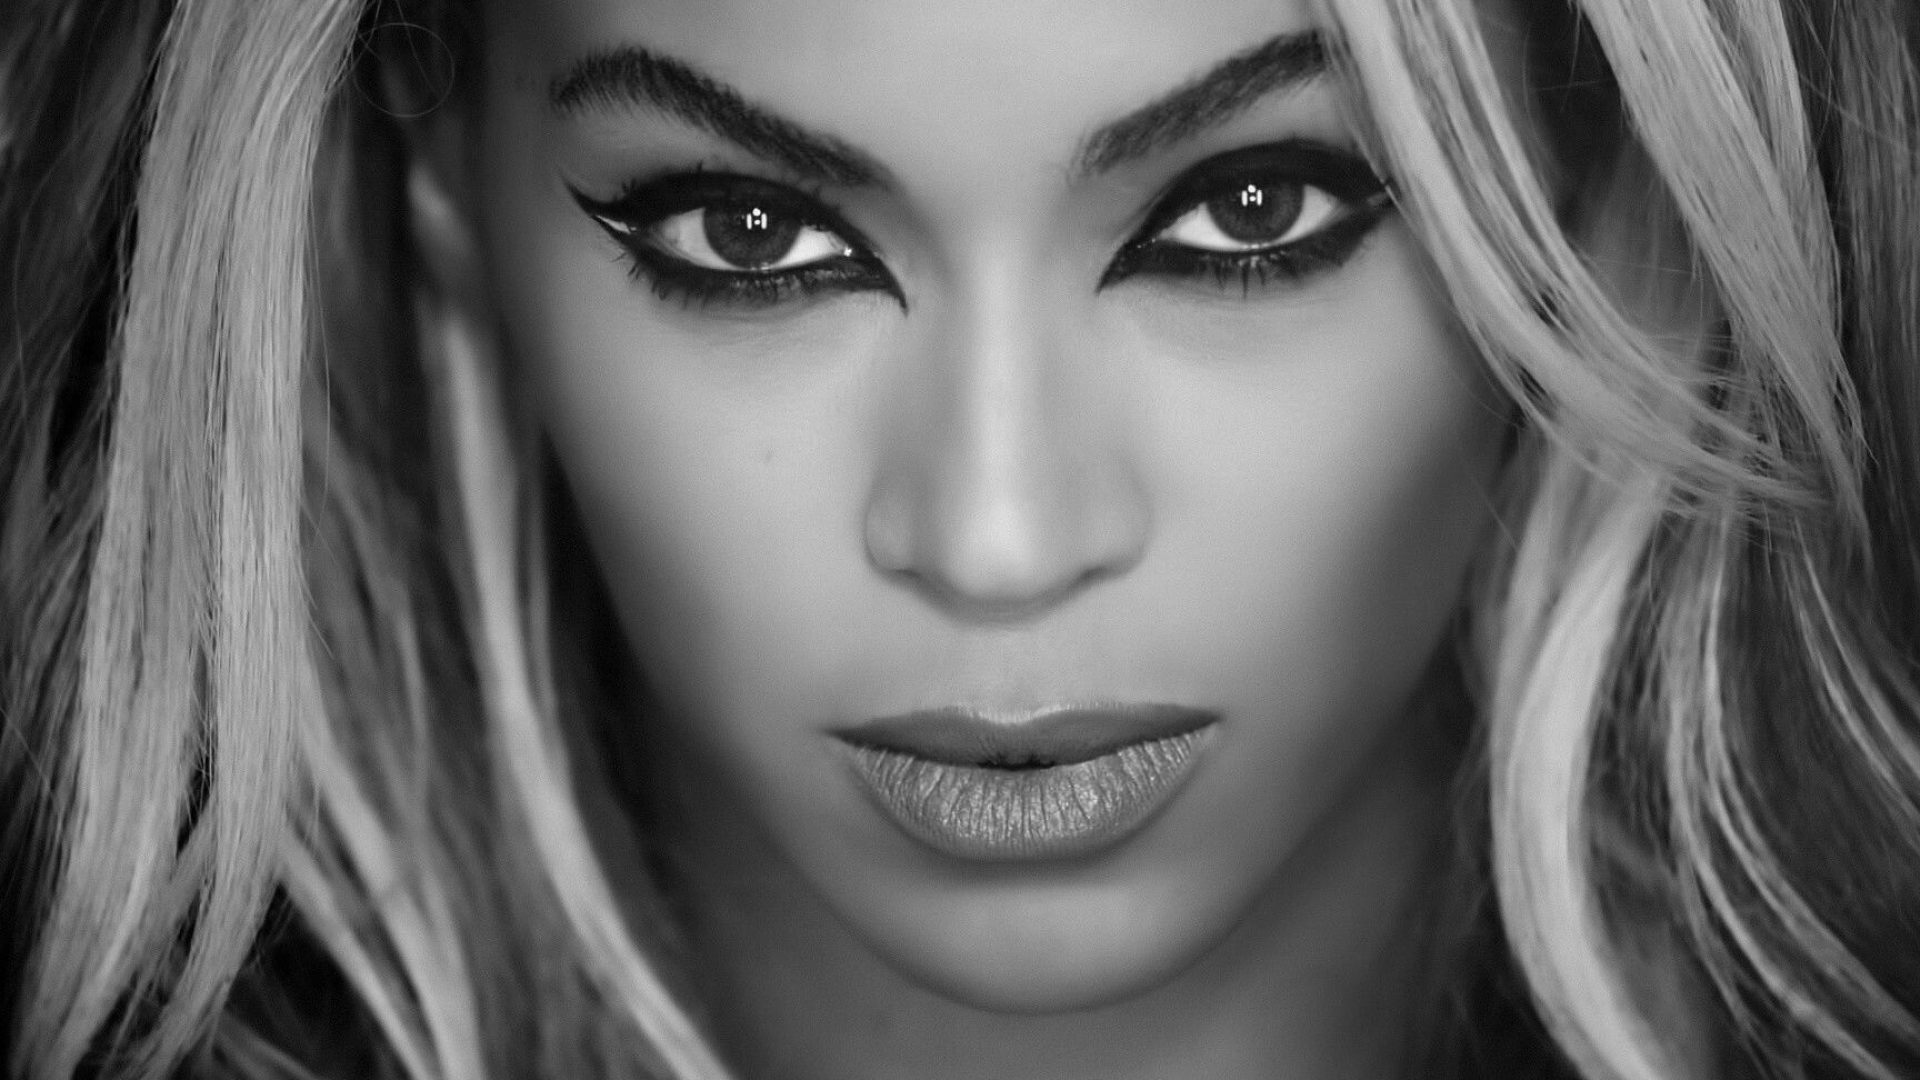 Beyonce: The first solo female artist to headline the main Pyramid stage at the 2011 Glastonbury Festival in over twenty years. 1920x1080 Full HD Wallpaper.